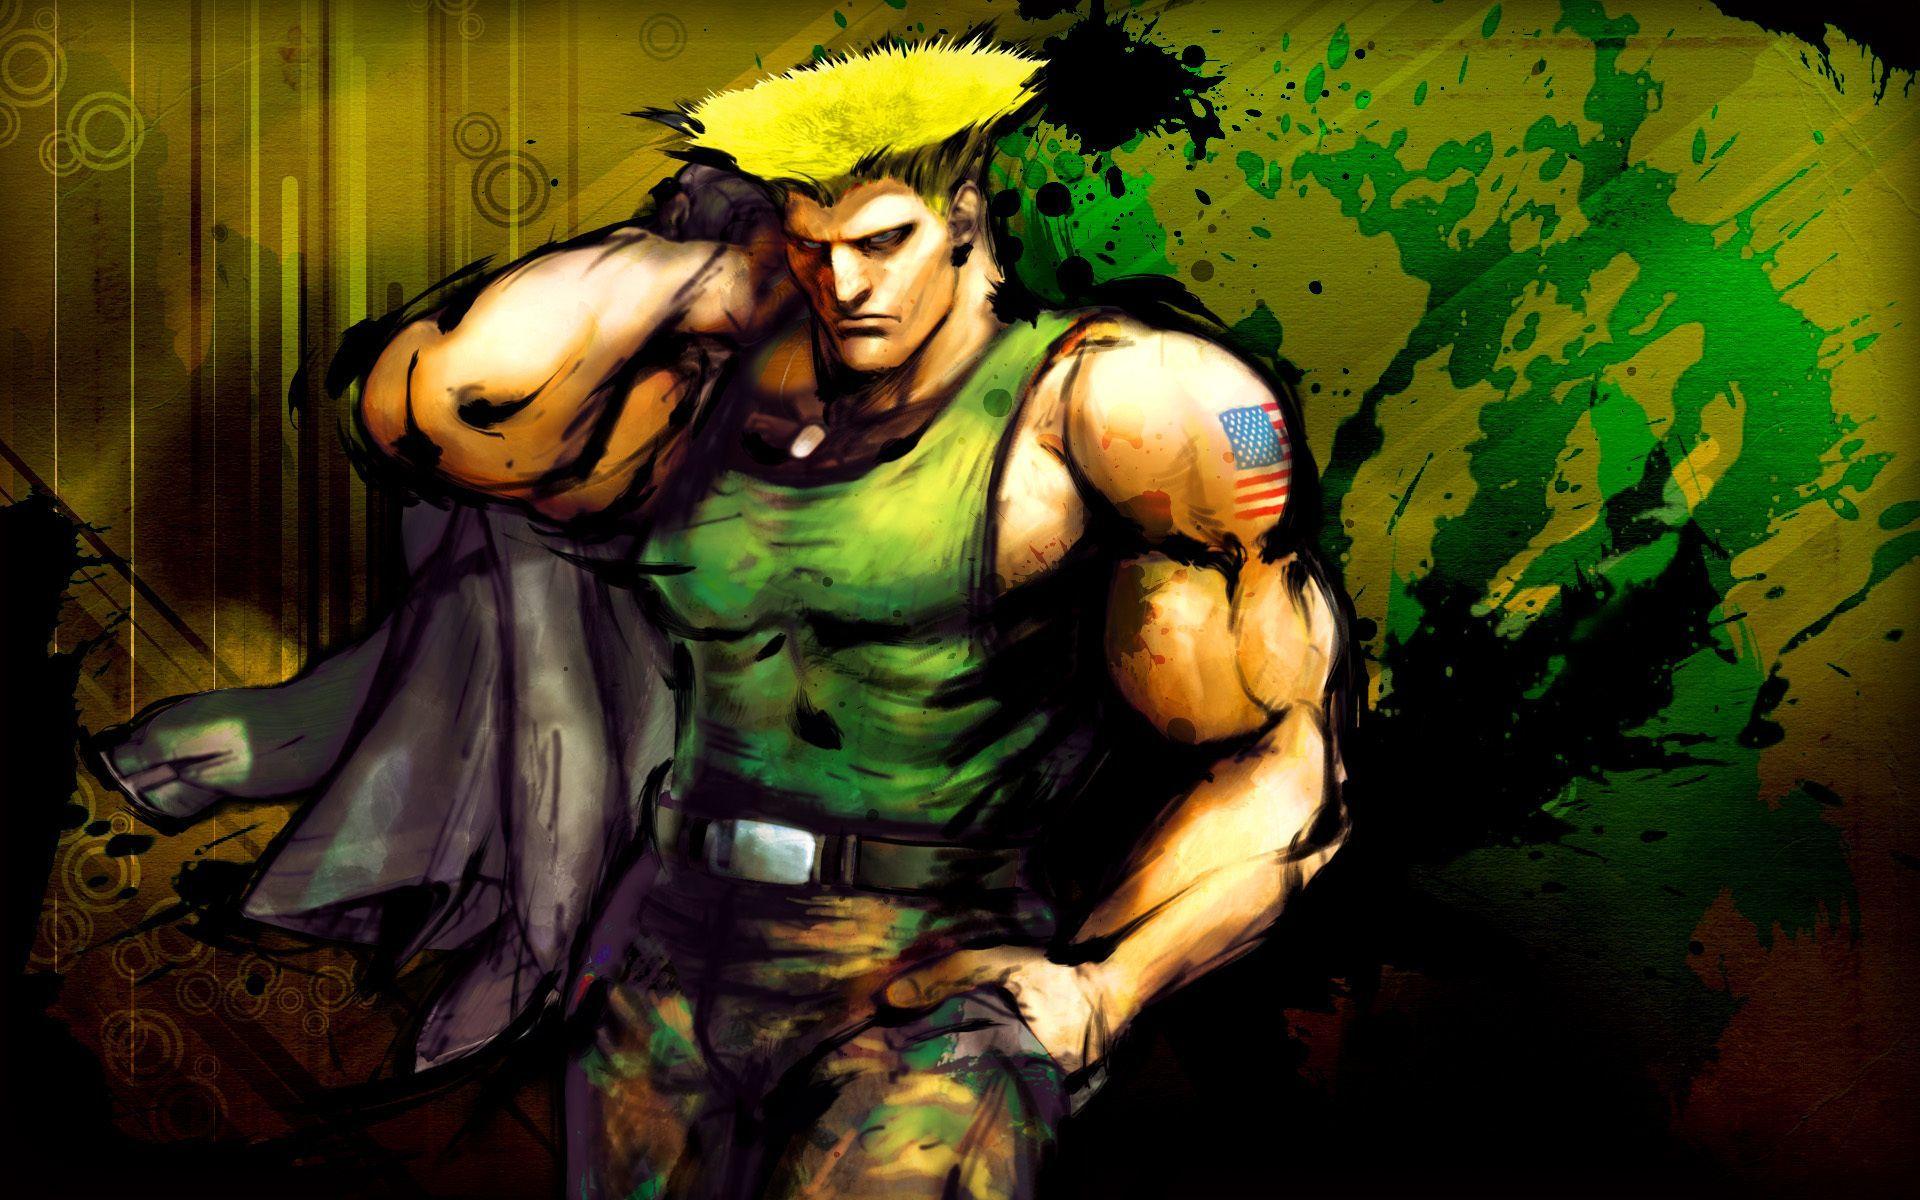 Cammy And Guile Street Fighter HD Fortnite Wallpapers